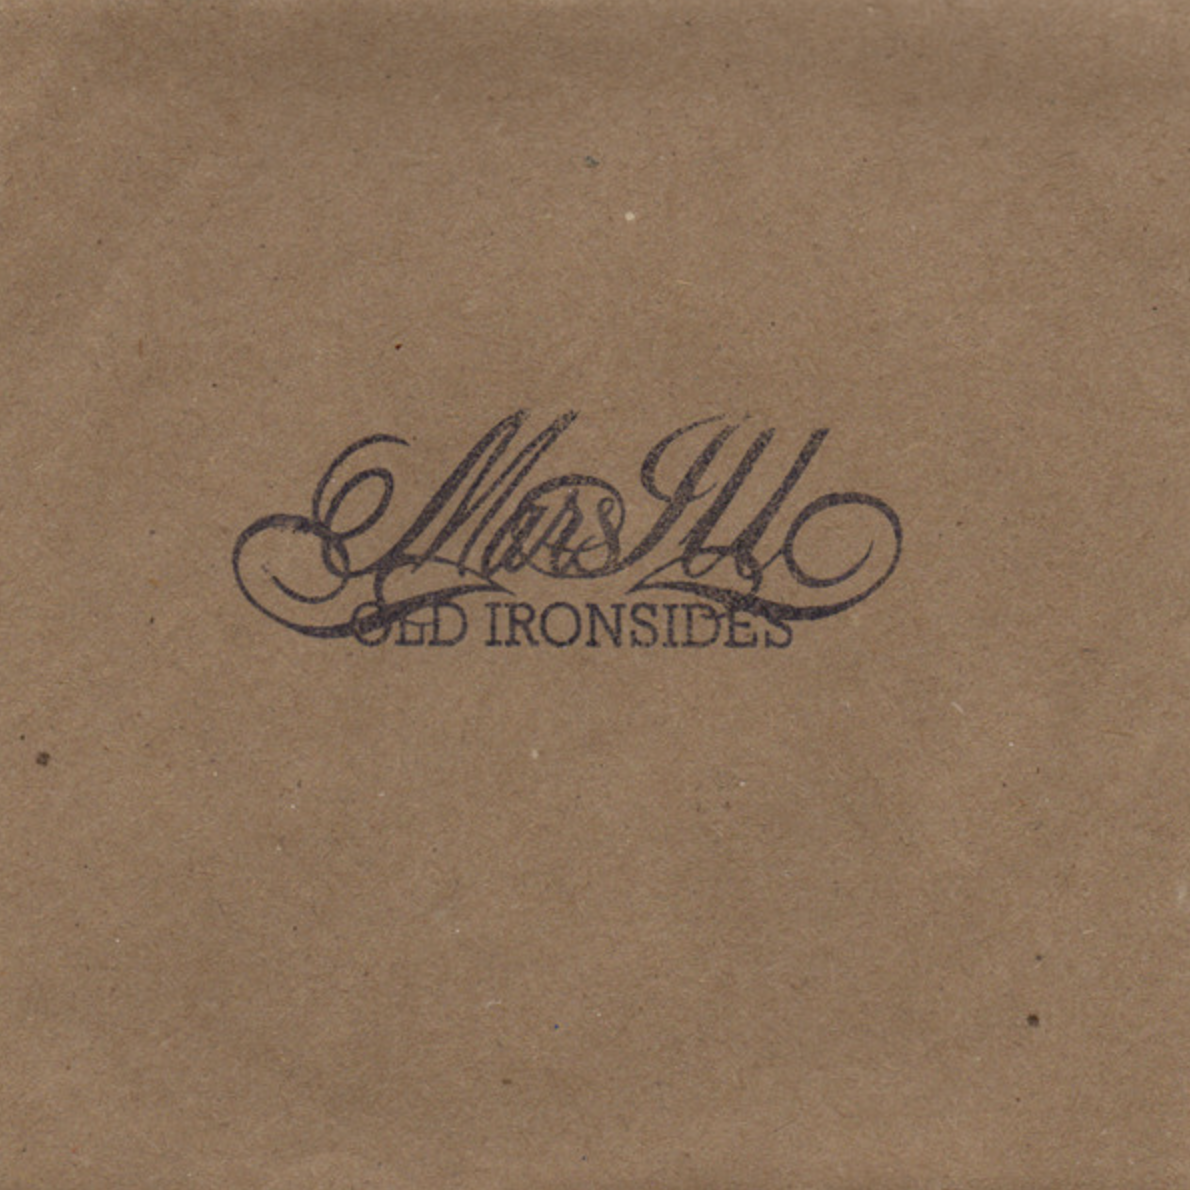 Mars ILL - Old Ironsides (DIGITAL DELIVERY)